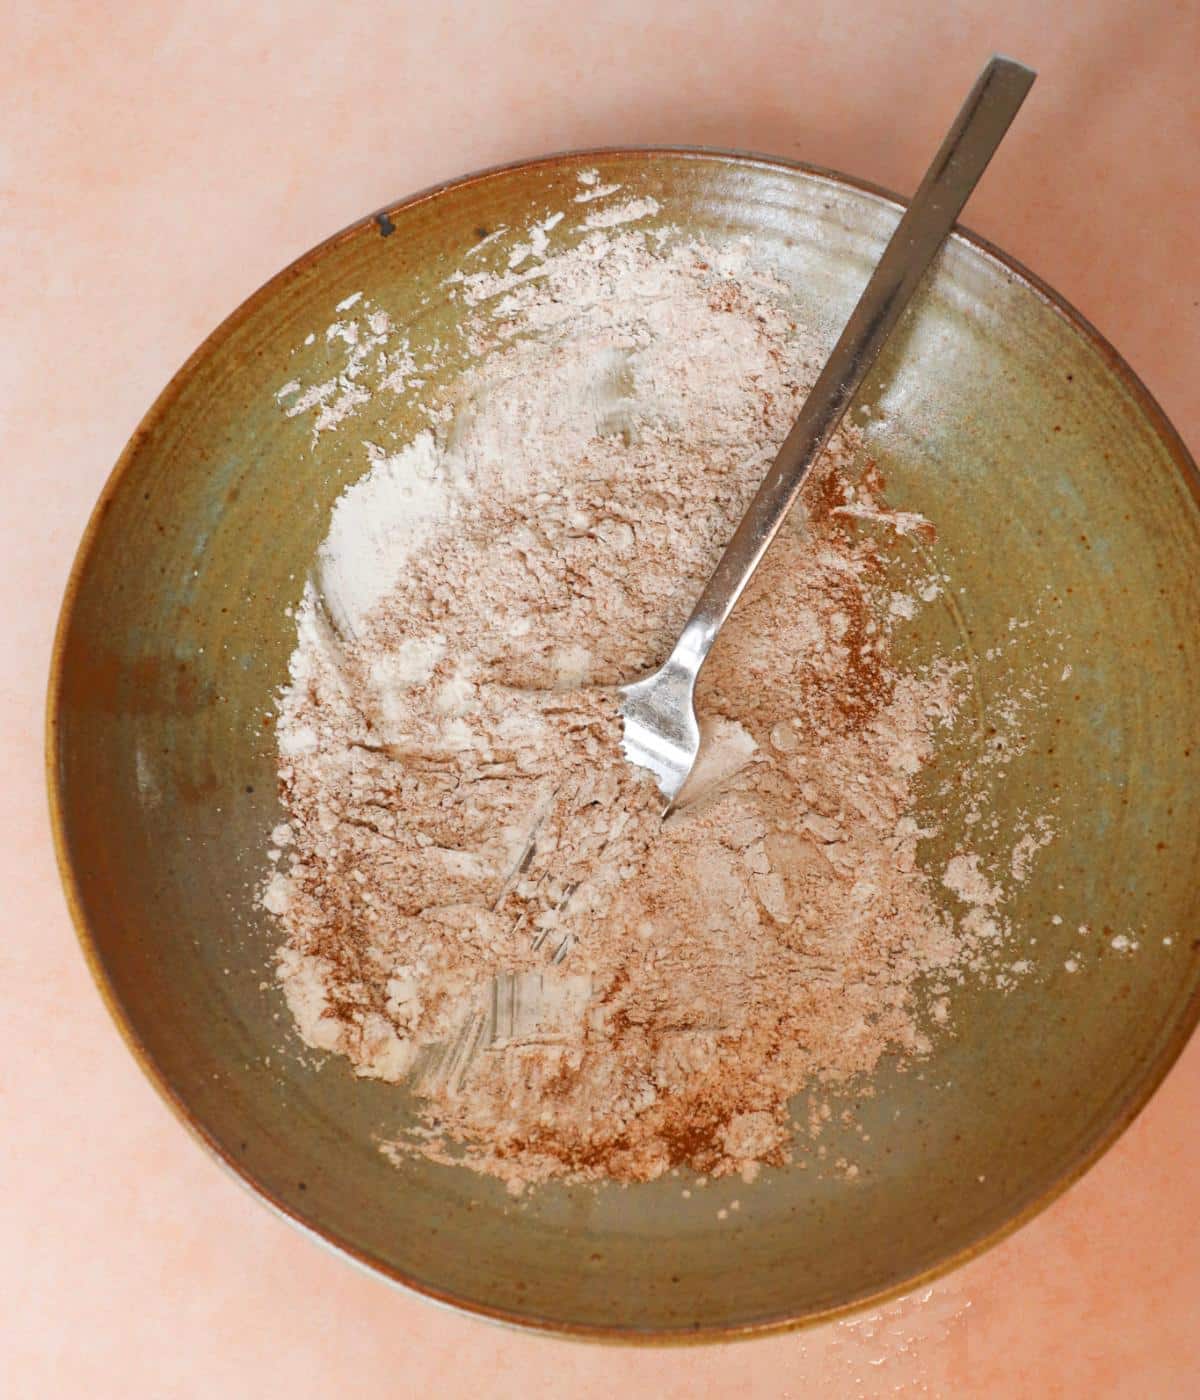 Dry ingredients for eggless french toast ingredients in a bowl with a fork.